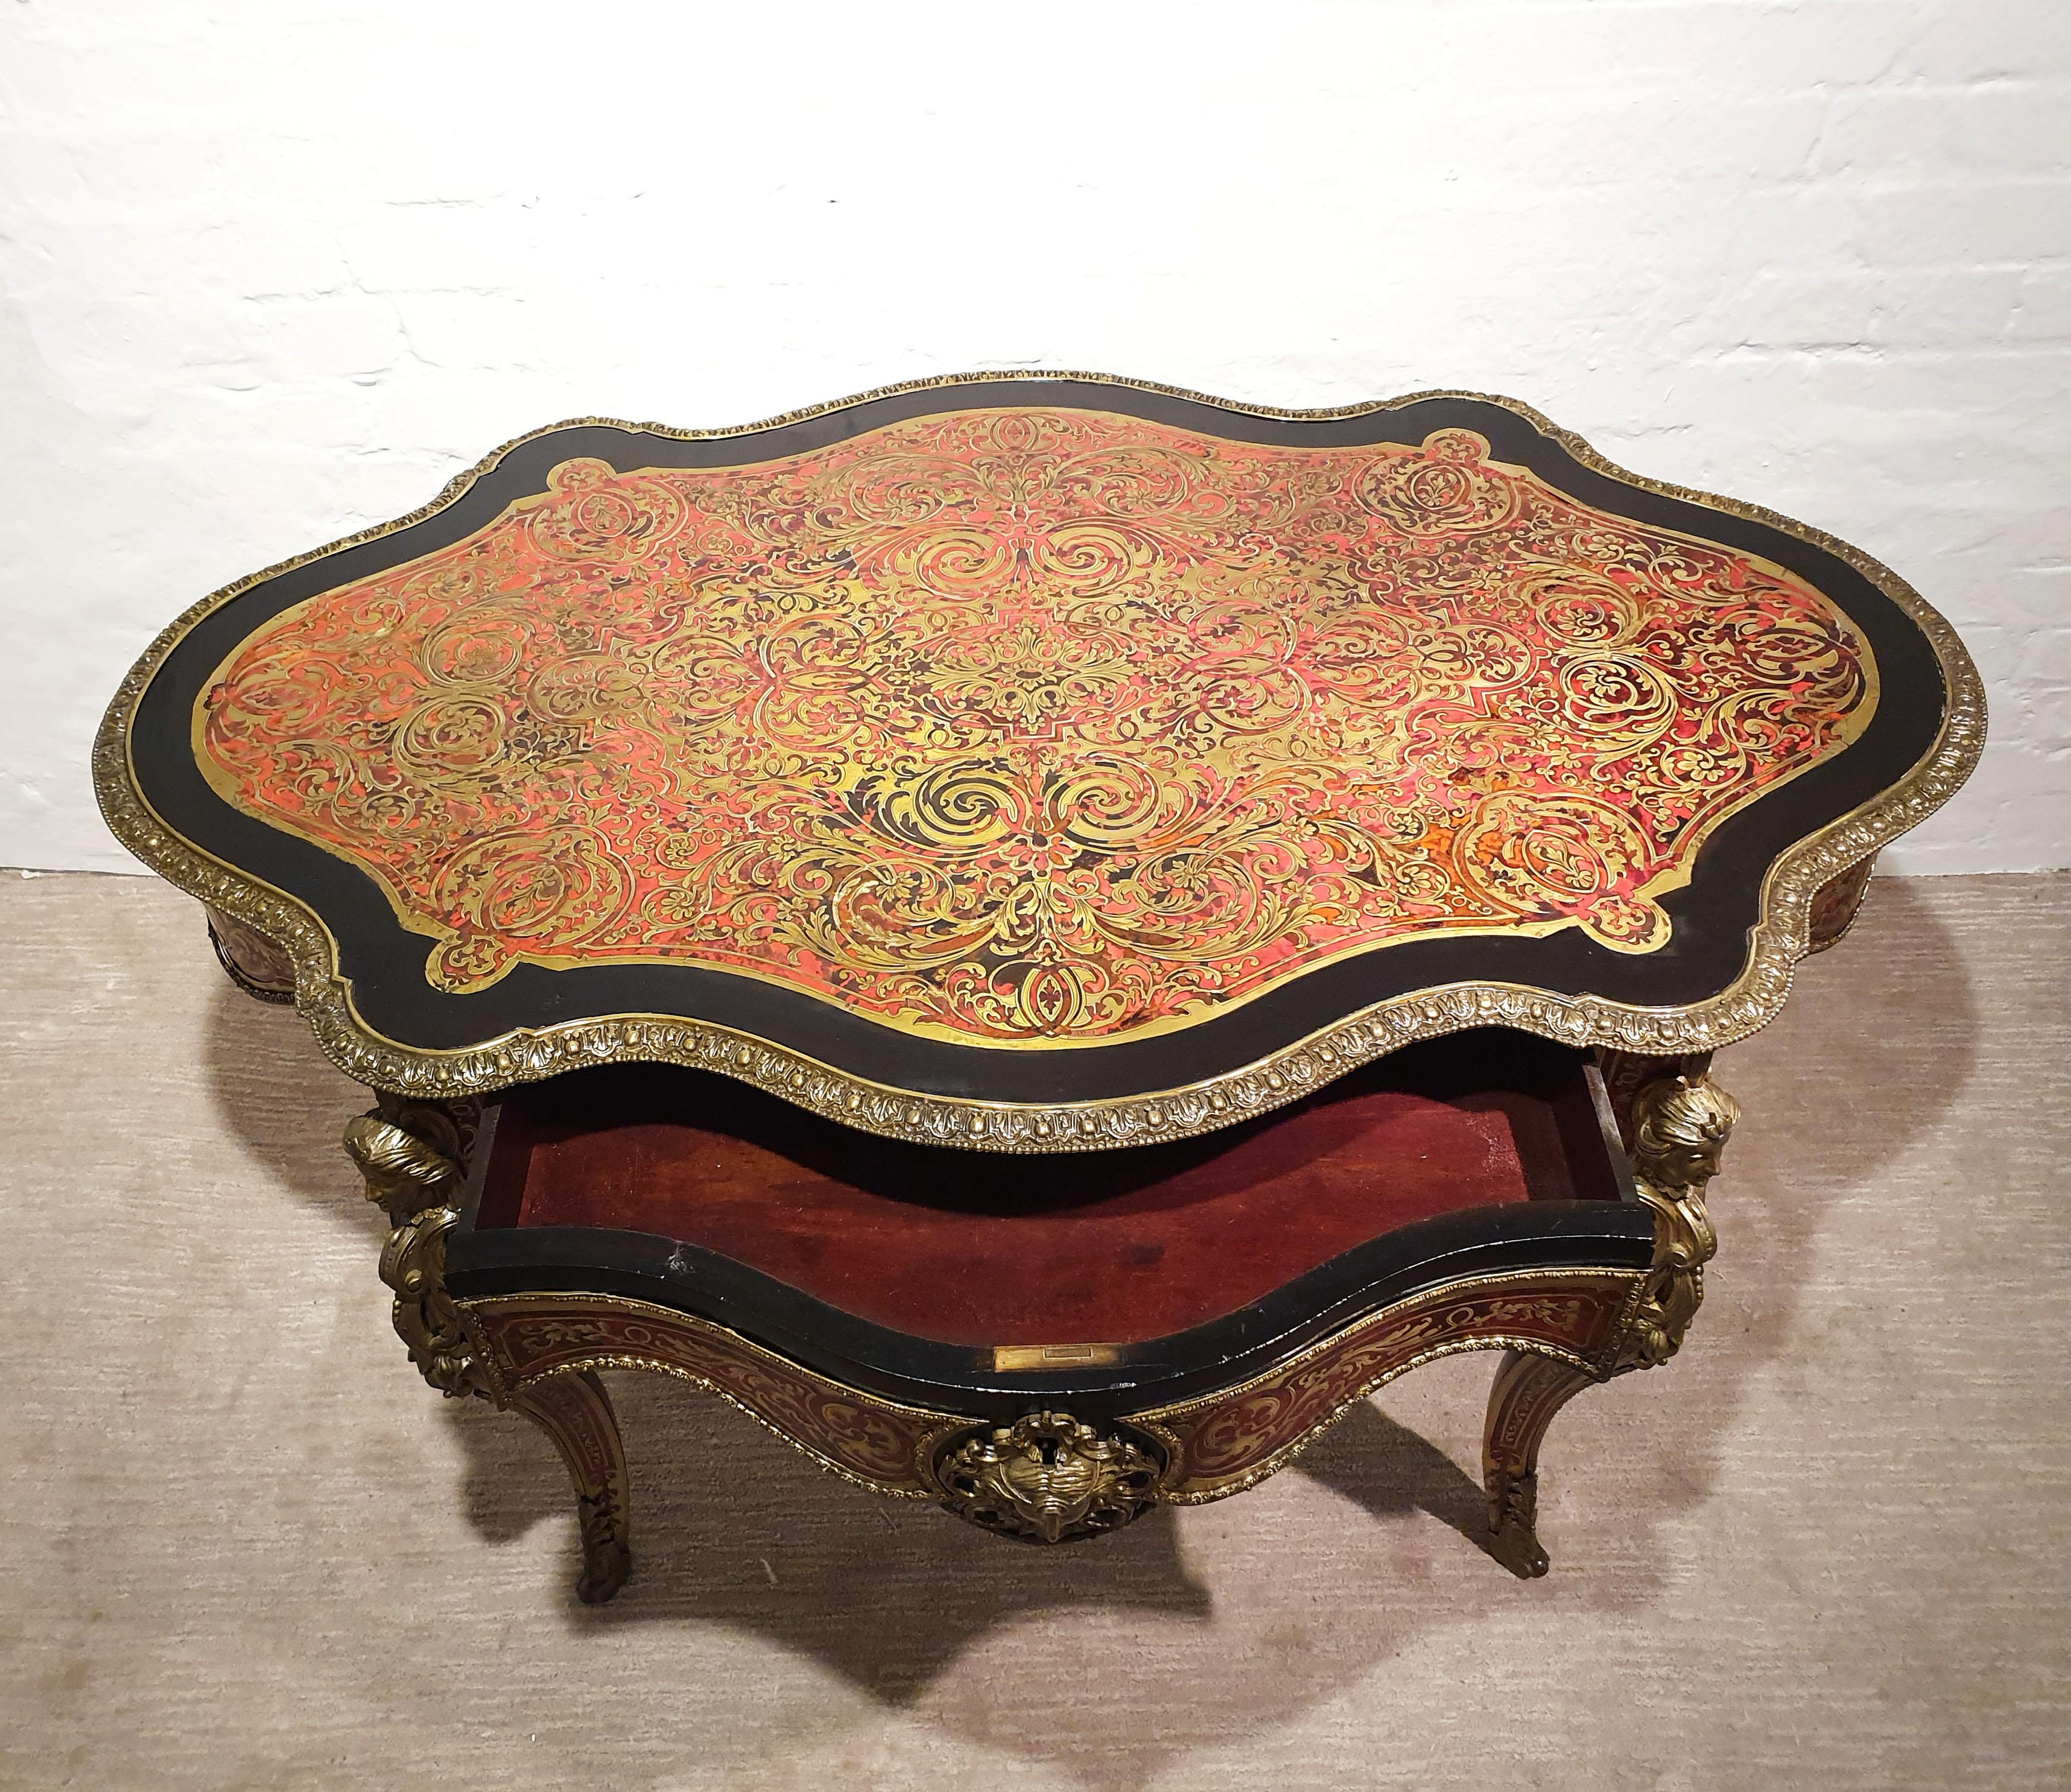 This magnificent and intricately detailed 19th century Boulle shaped center table features one central top drawer with a shaped skirt and ornate masks on each side, surrounded by an ebonised wood border around the top edge. The table is supported on